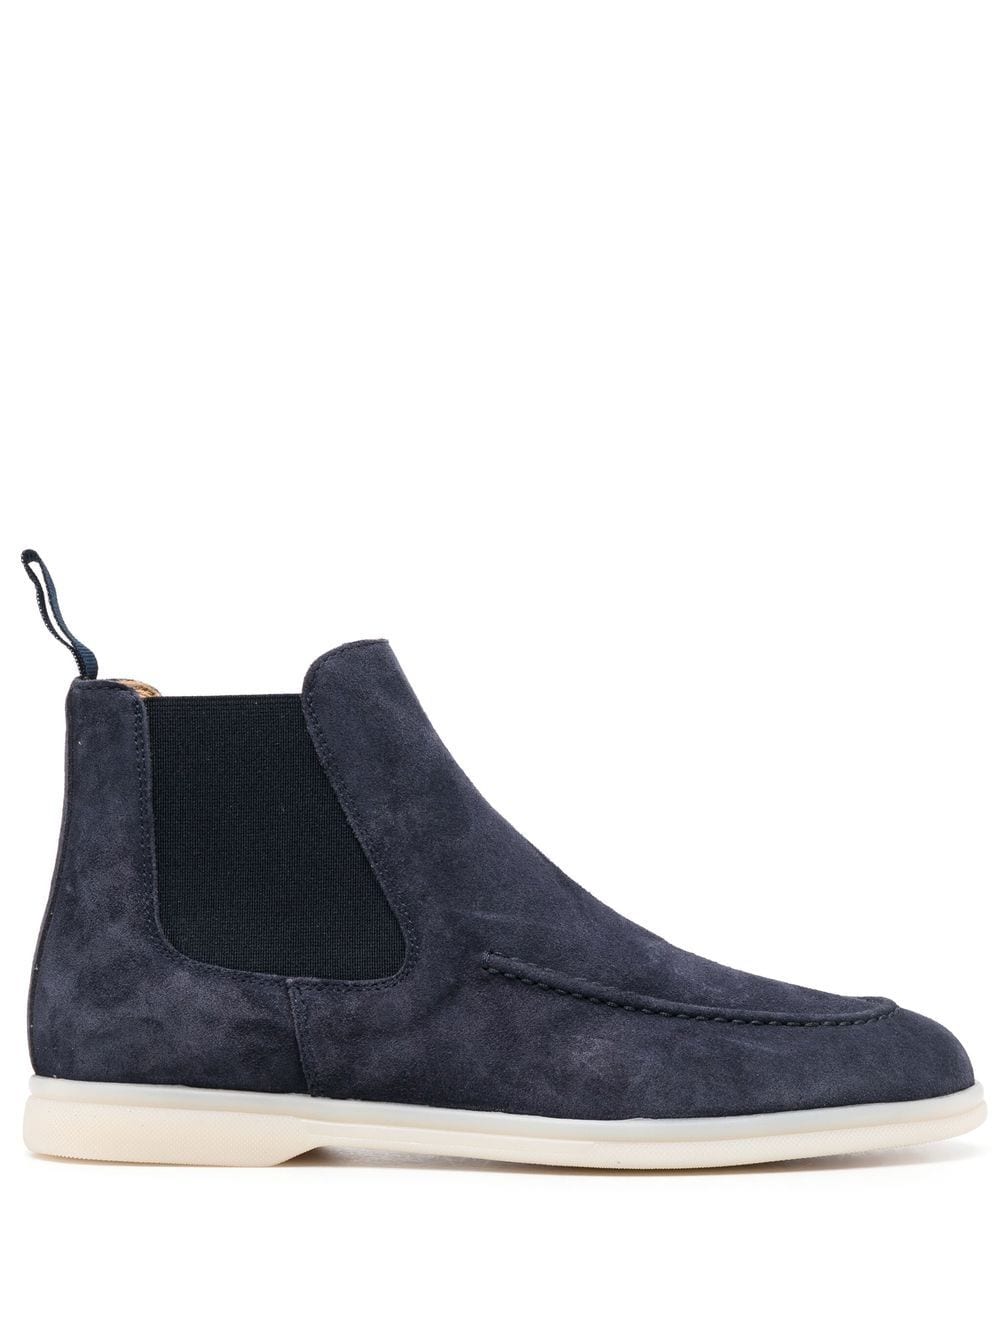 Scarosso Eugenia Suede Ankle Boots - Farfetch